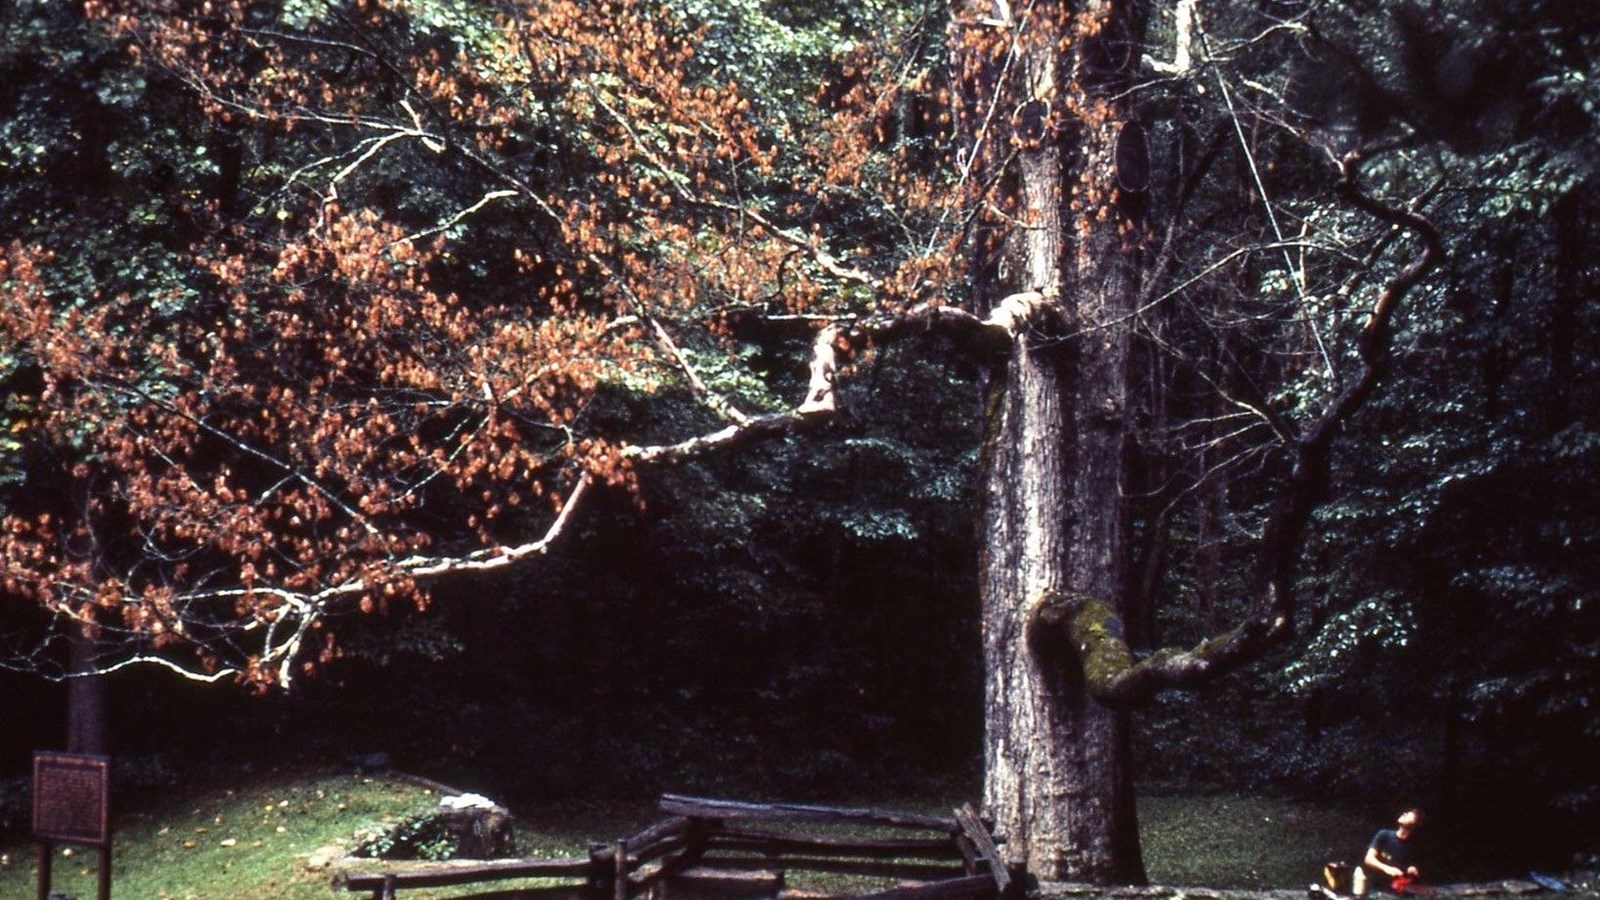 color photo of a large oak tree with a fence around it.